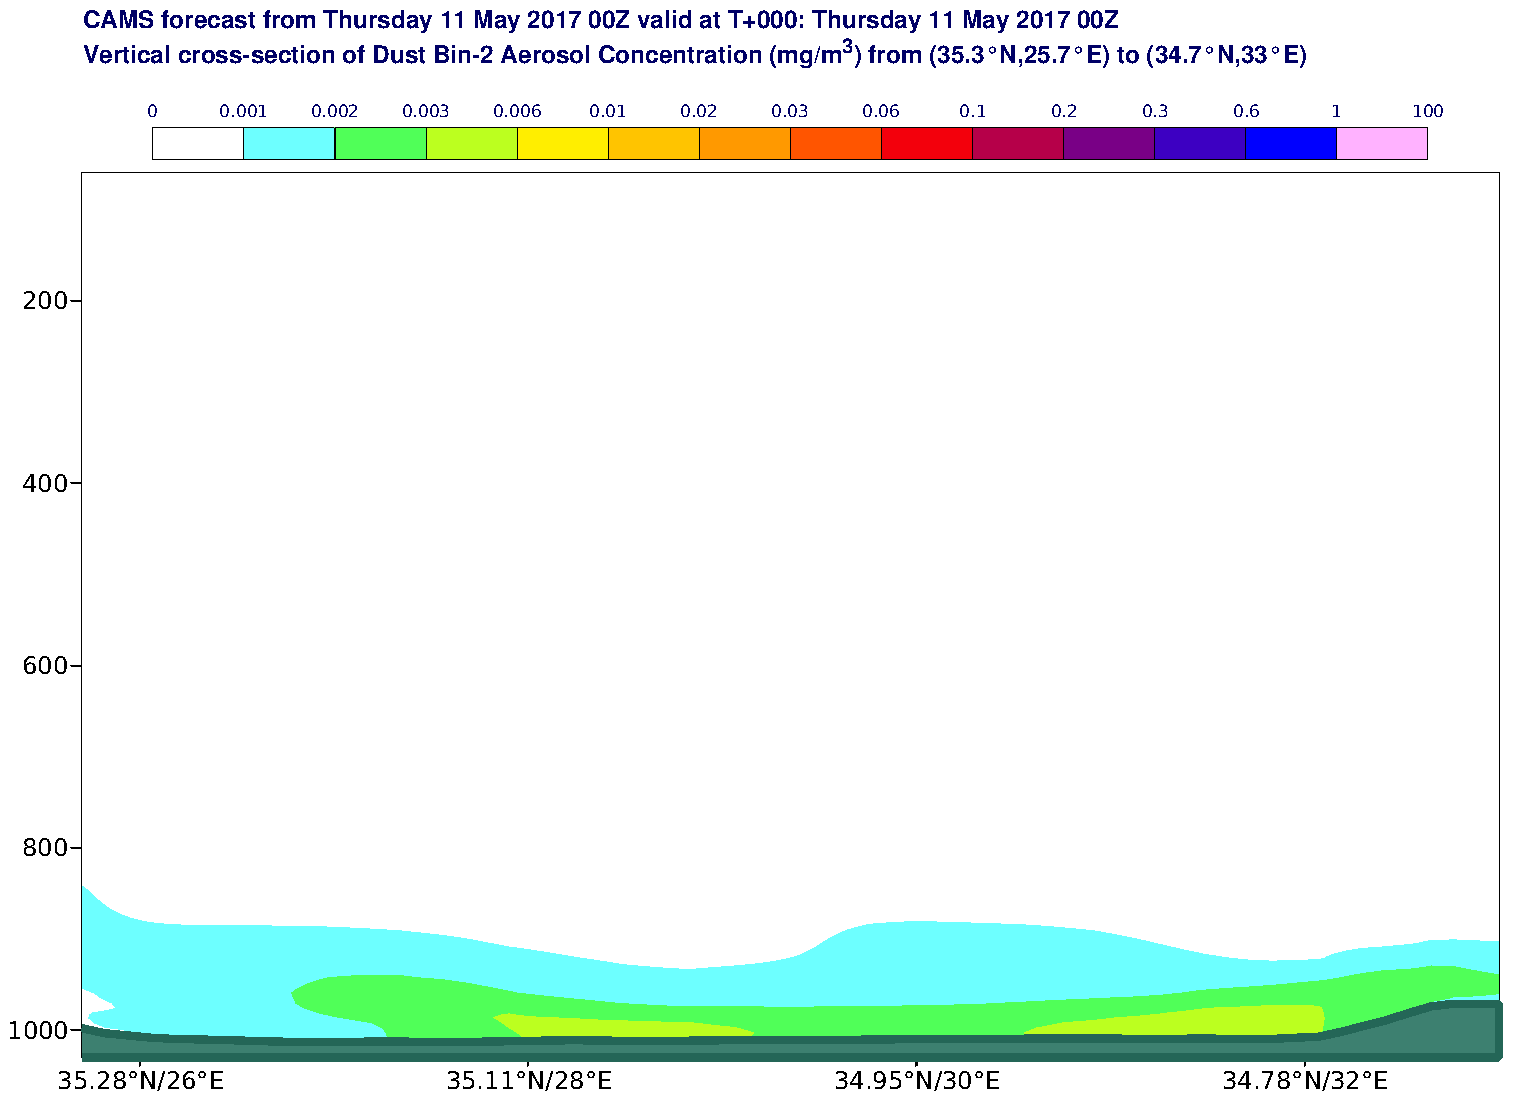 Vertical cross-section of Dust Bin-2 Aerosol Concentration (mg/m3) valid at T0 - 2017-05-11 00:00